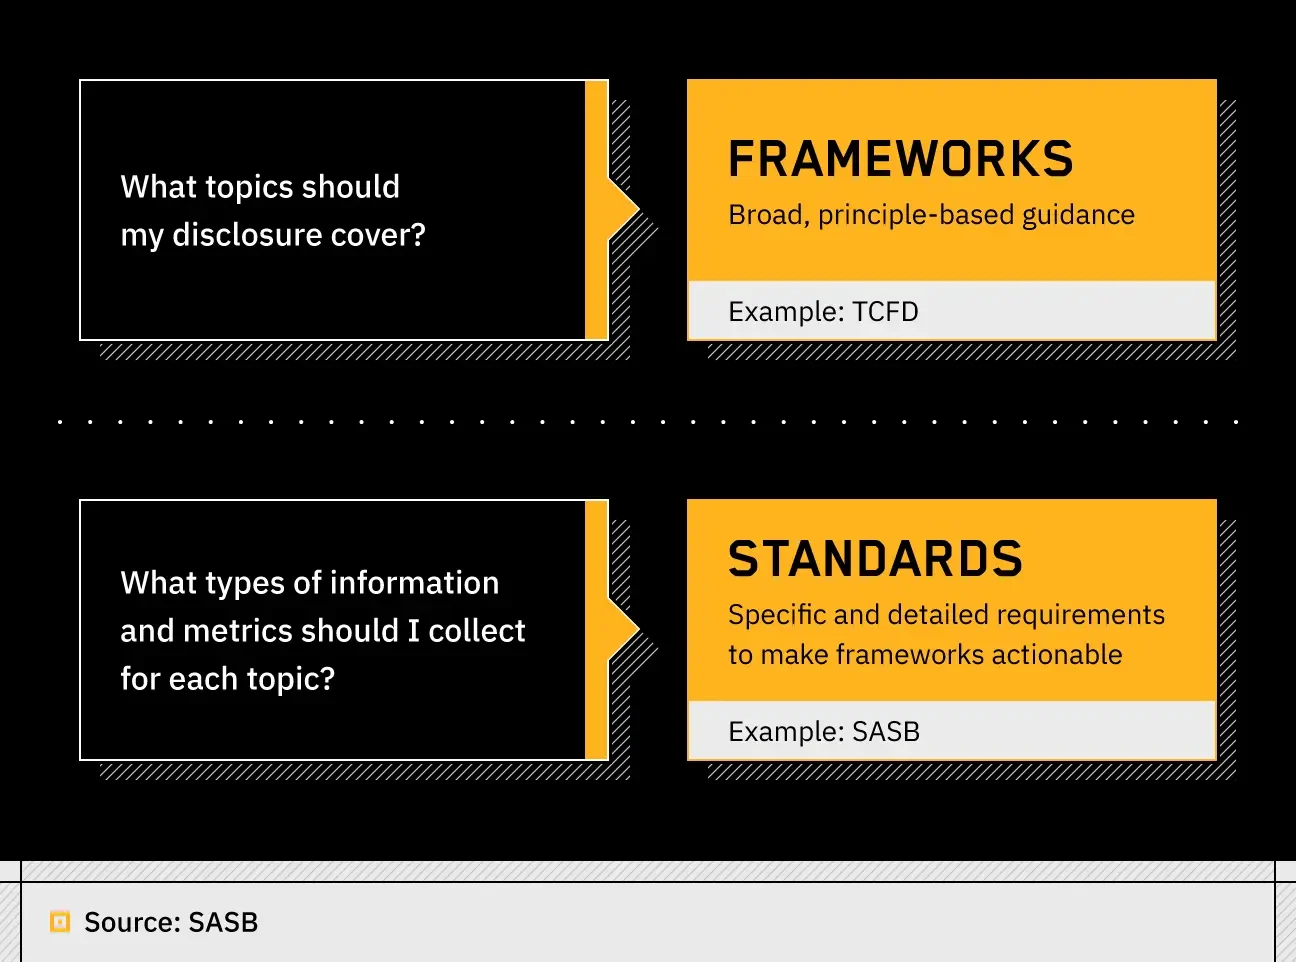 text boxes comparing the differences between frameworks and standards according to SASB